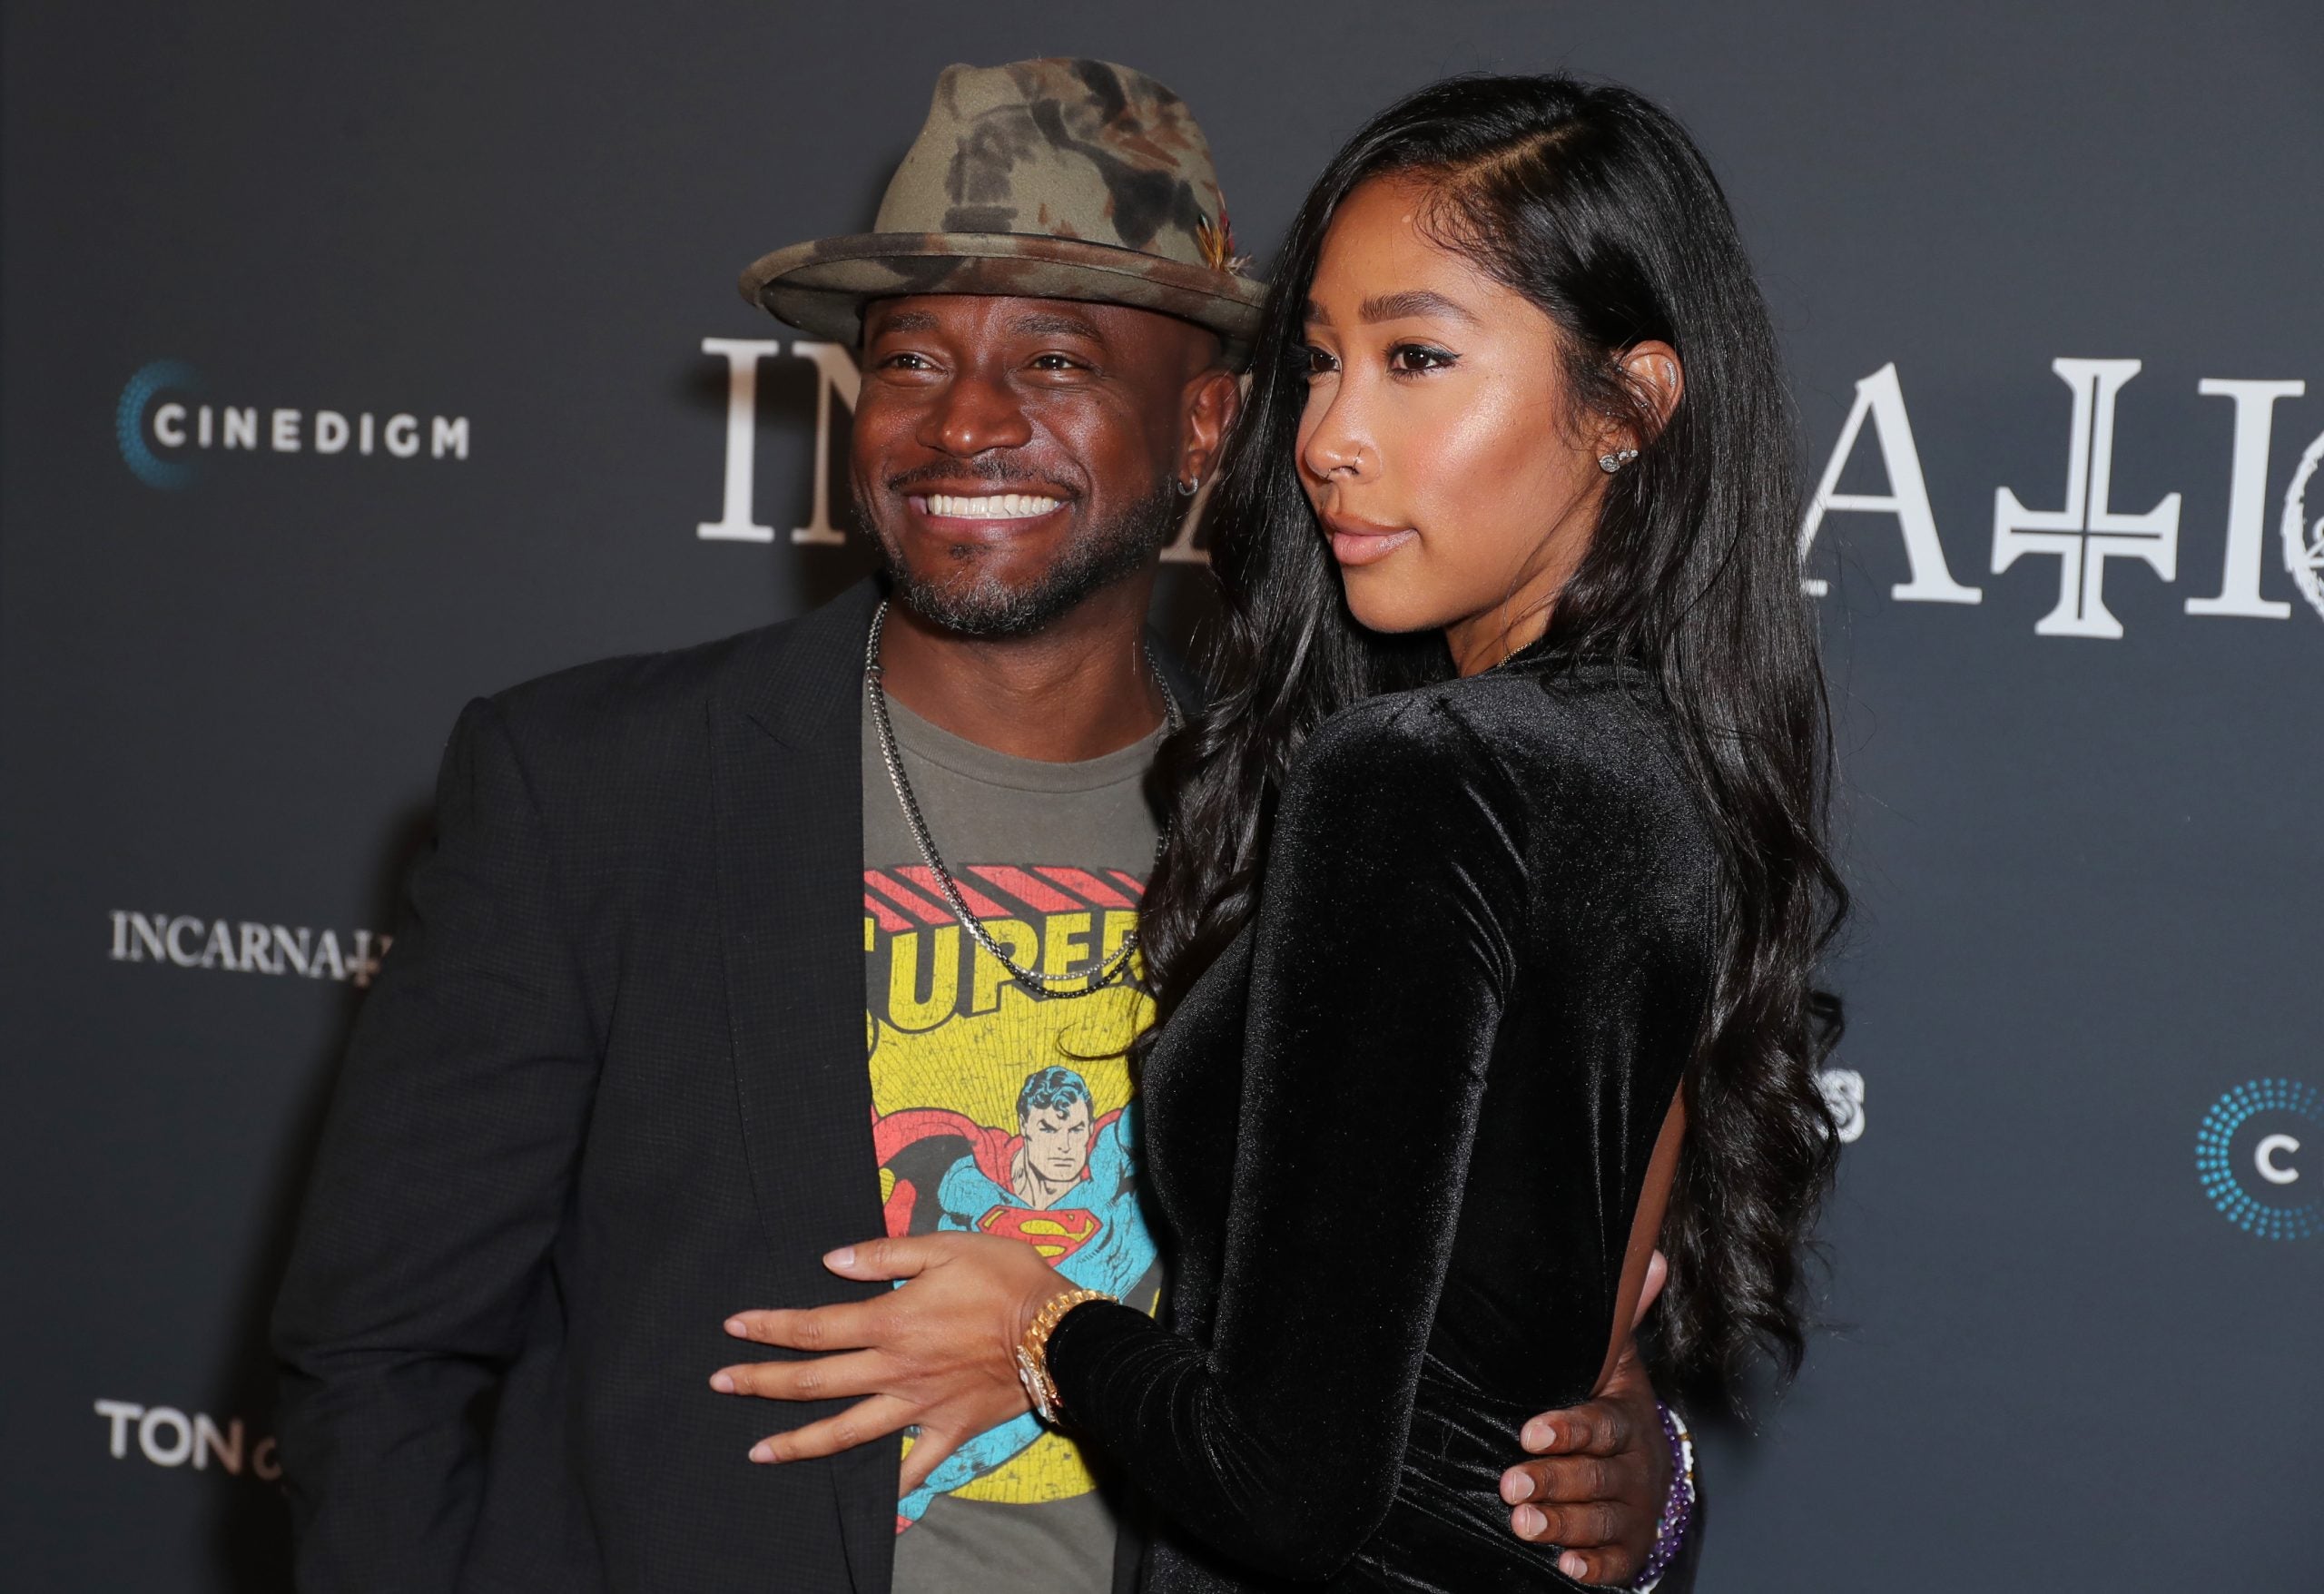 Here's Why People Are Loving Taye Diggs And Apryl Jones Together